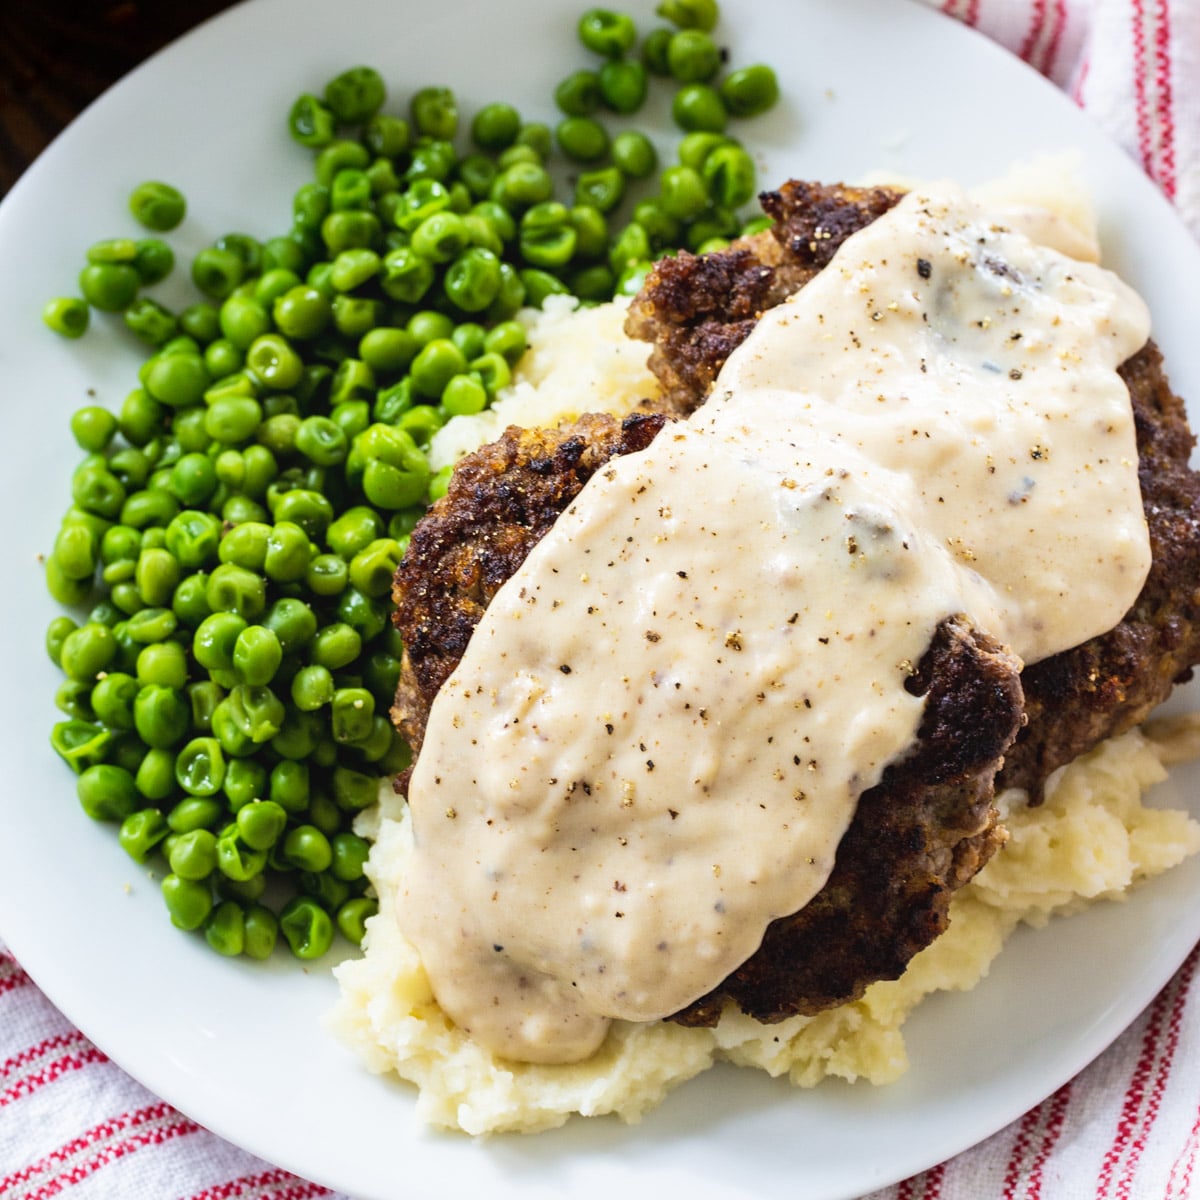 Hamburger Steaks over mashed potatoes with peas.